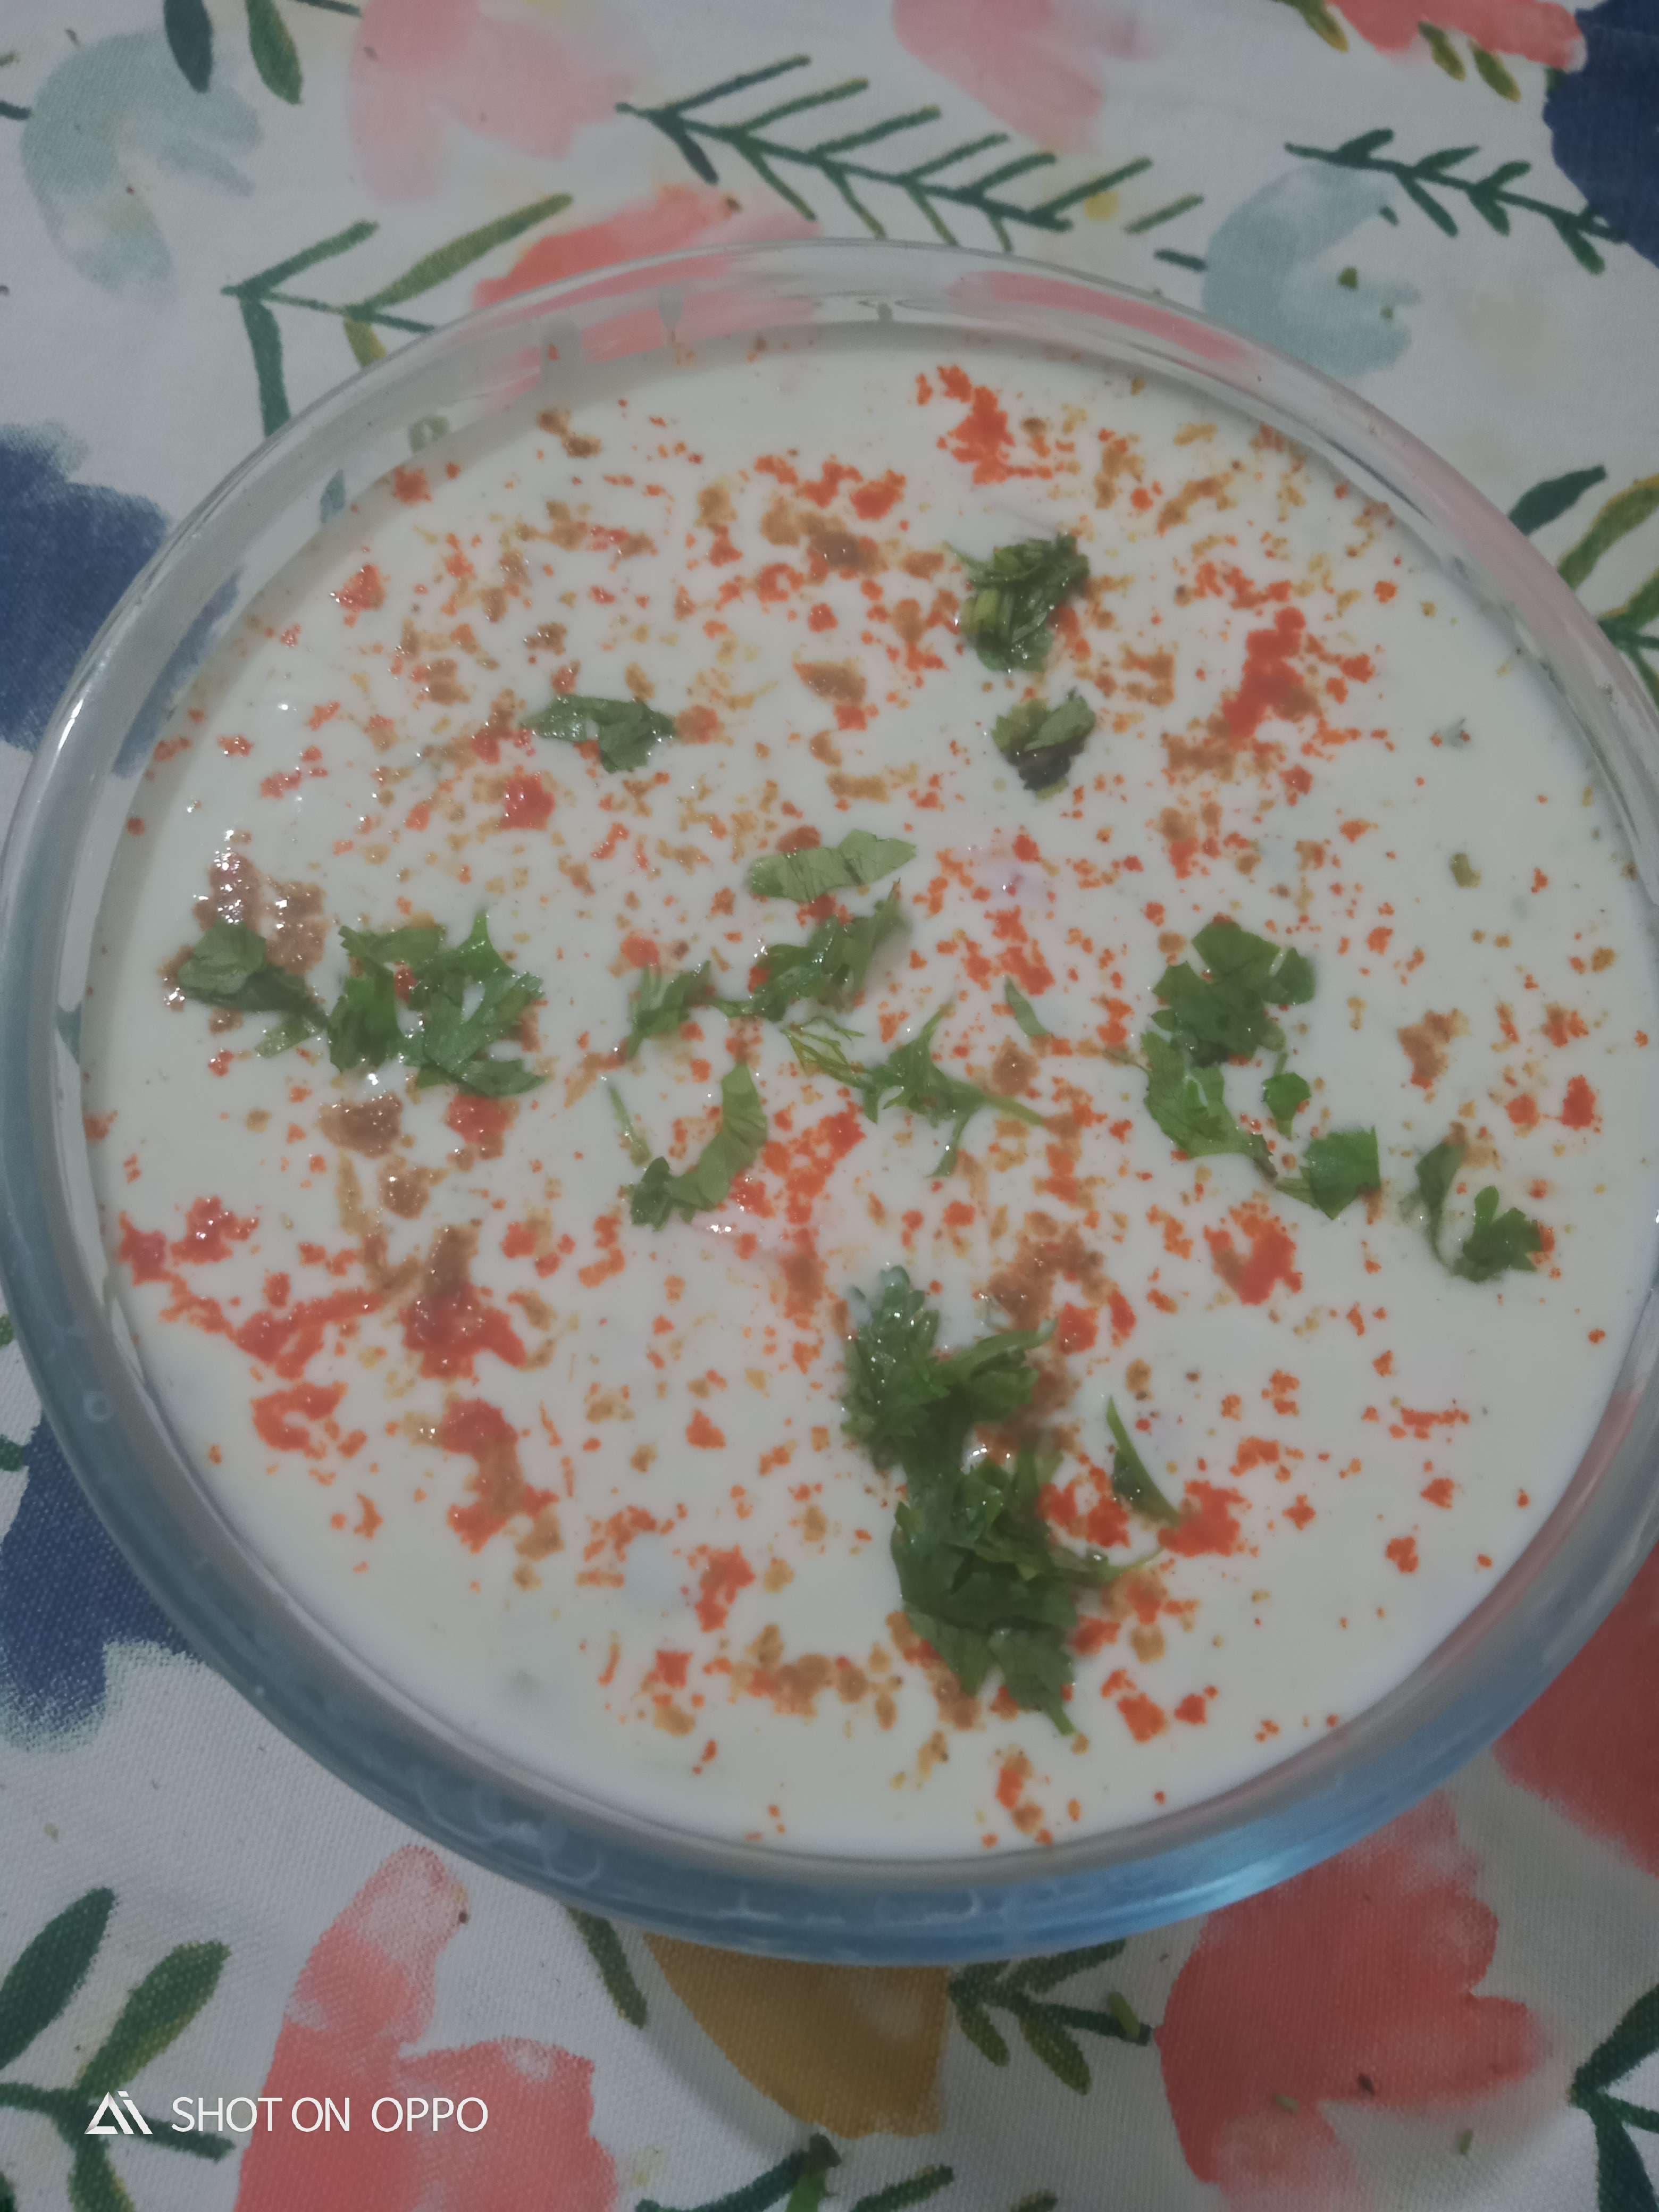 Tasty Pineapple Raita cooked by COOX chefs cooks during occasions parties events at home